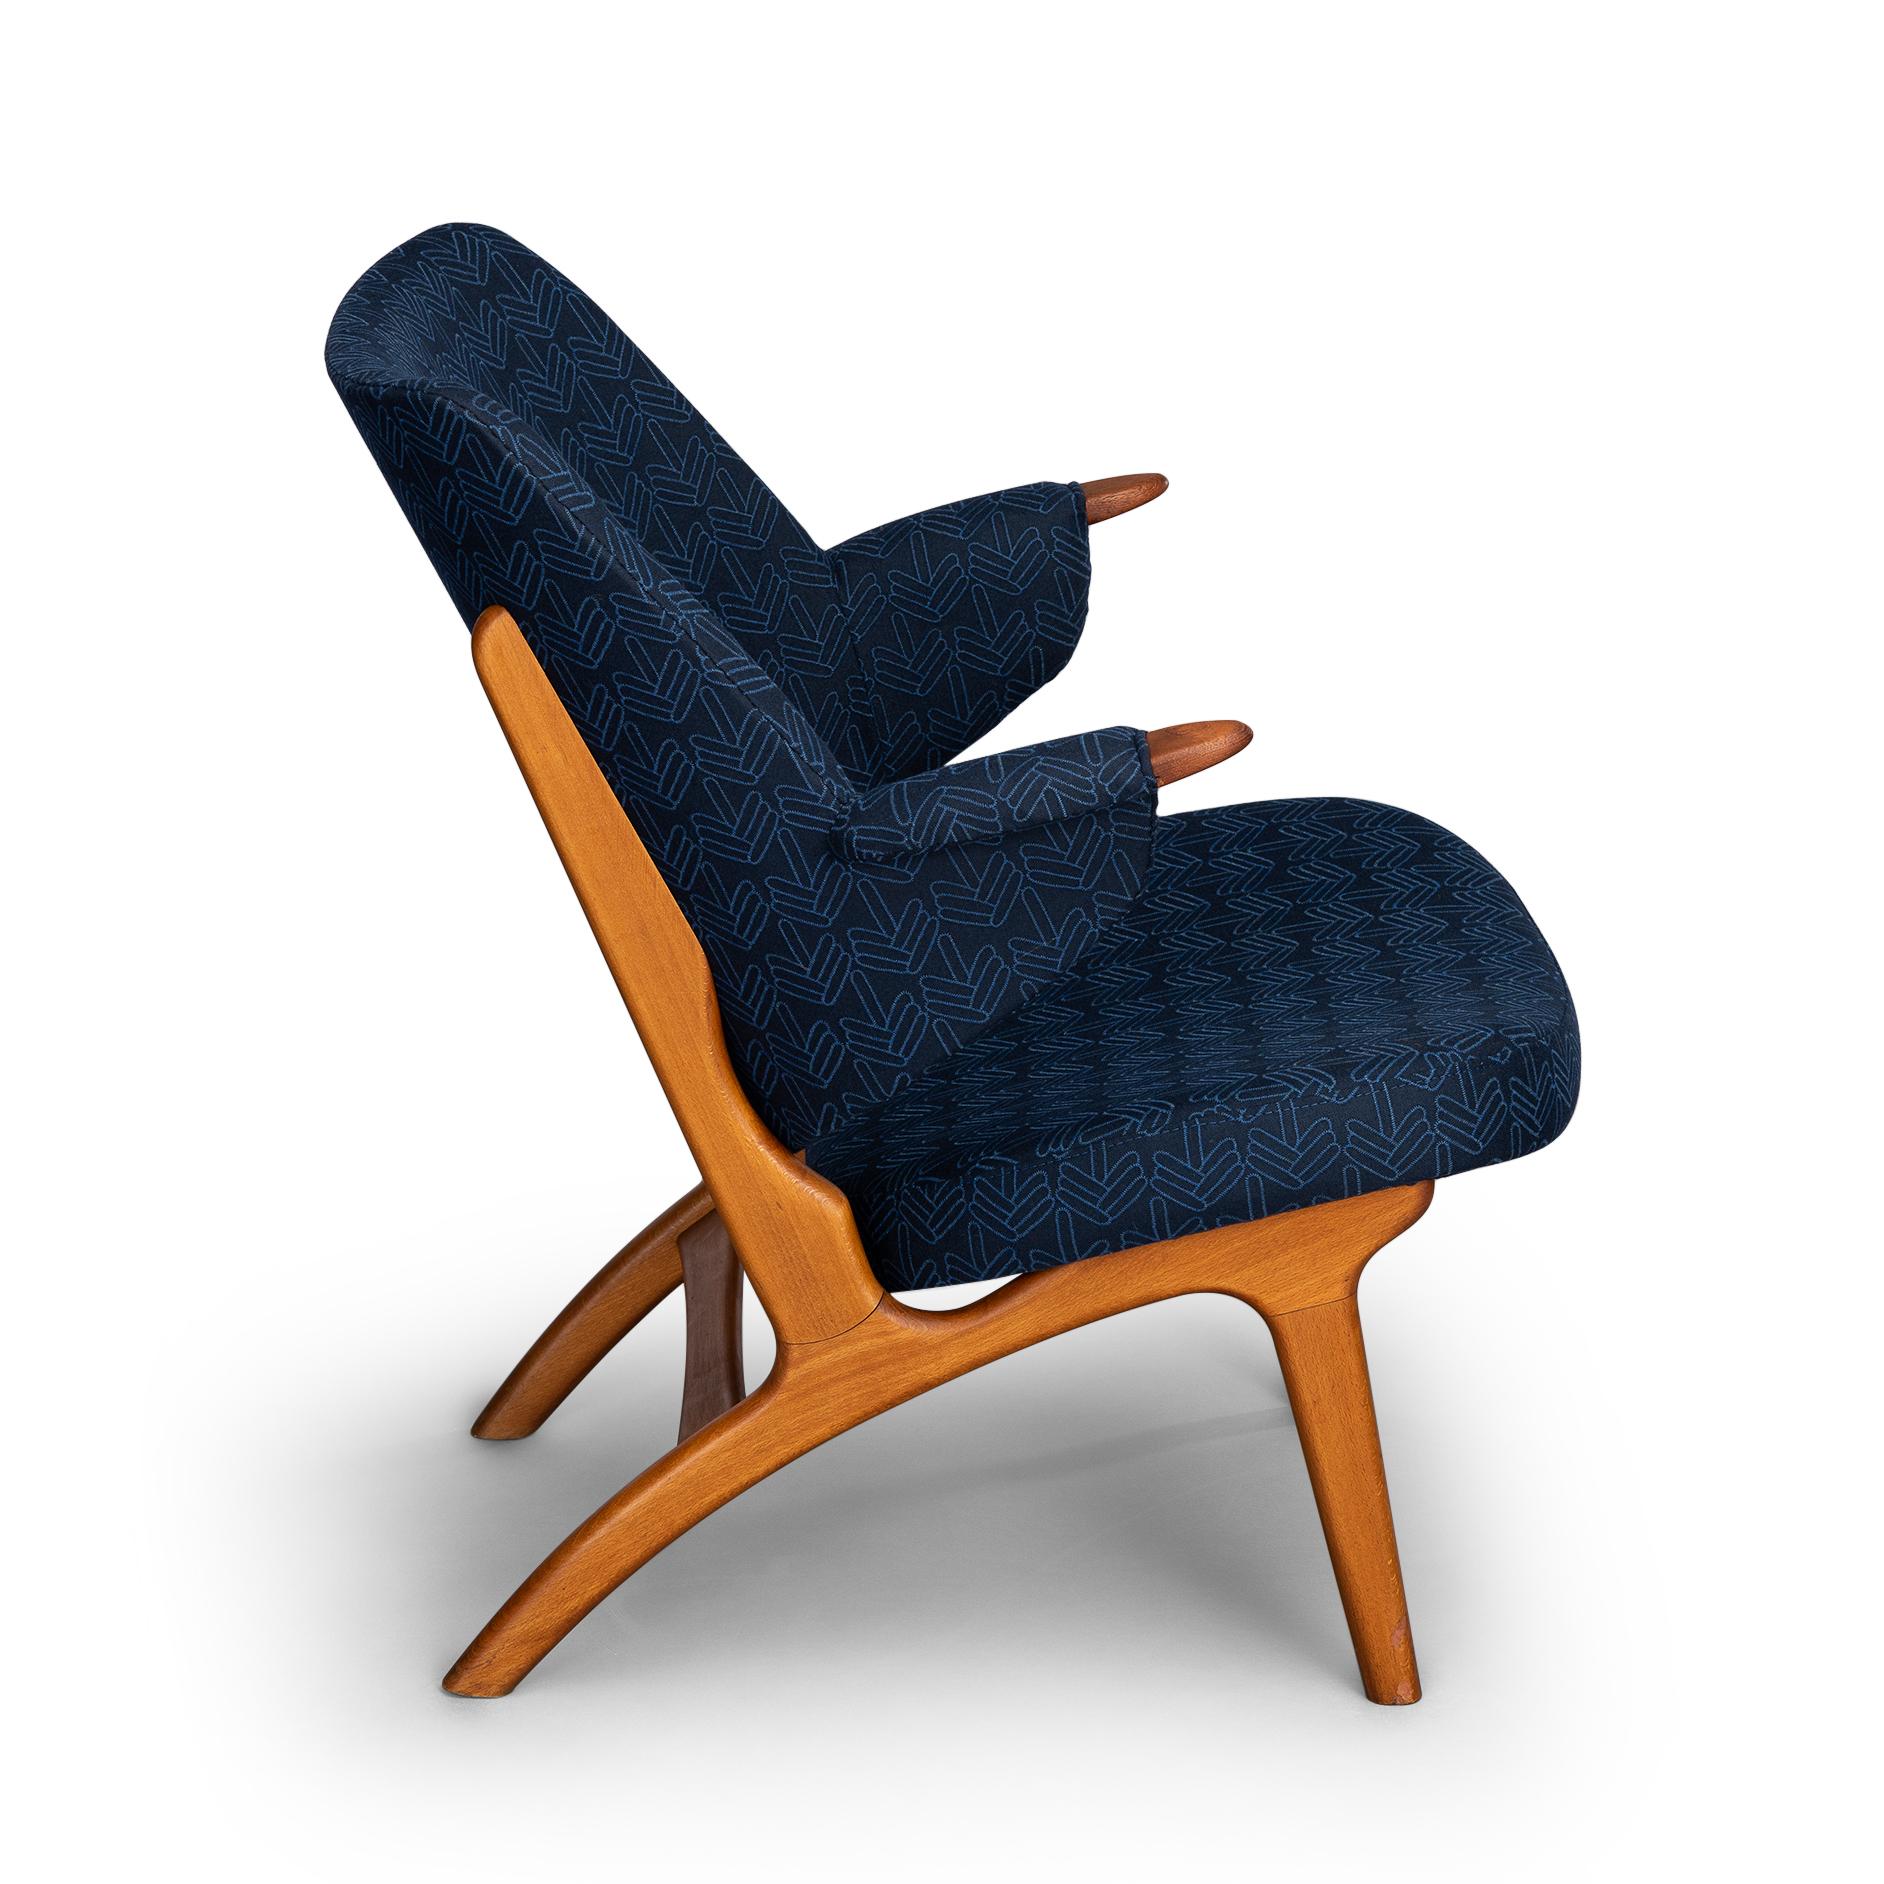 Wool Vintage Danish Blue Model No. 14L Armchair from Poul Hundevad, 1950s